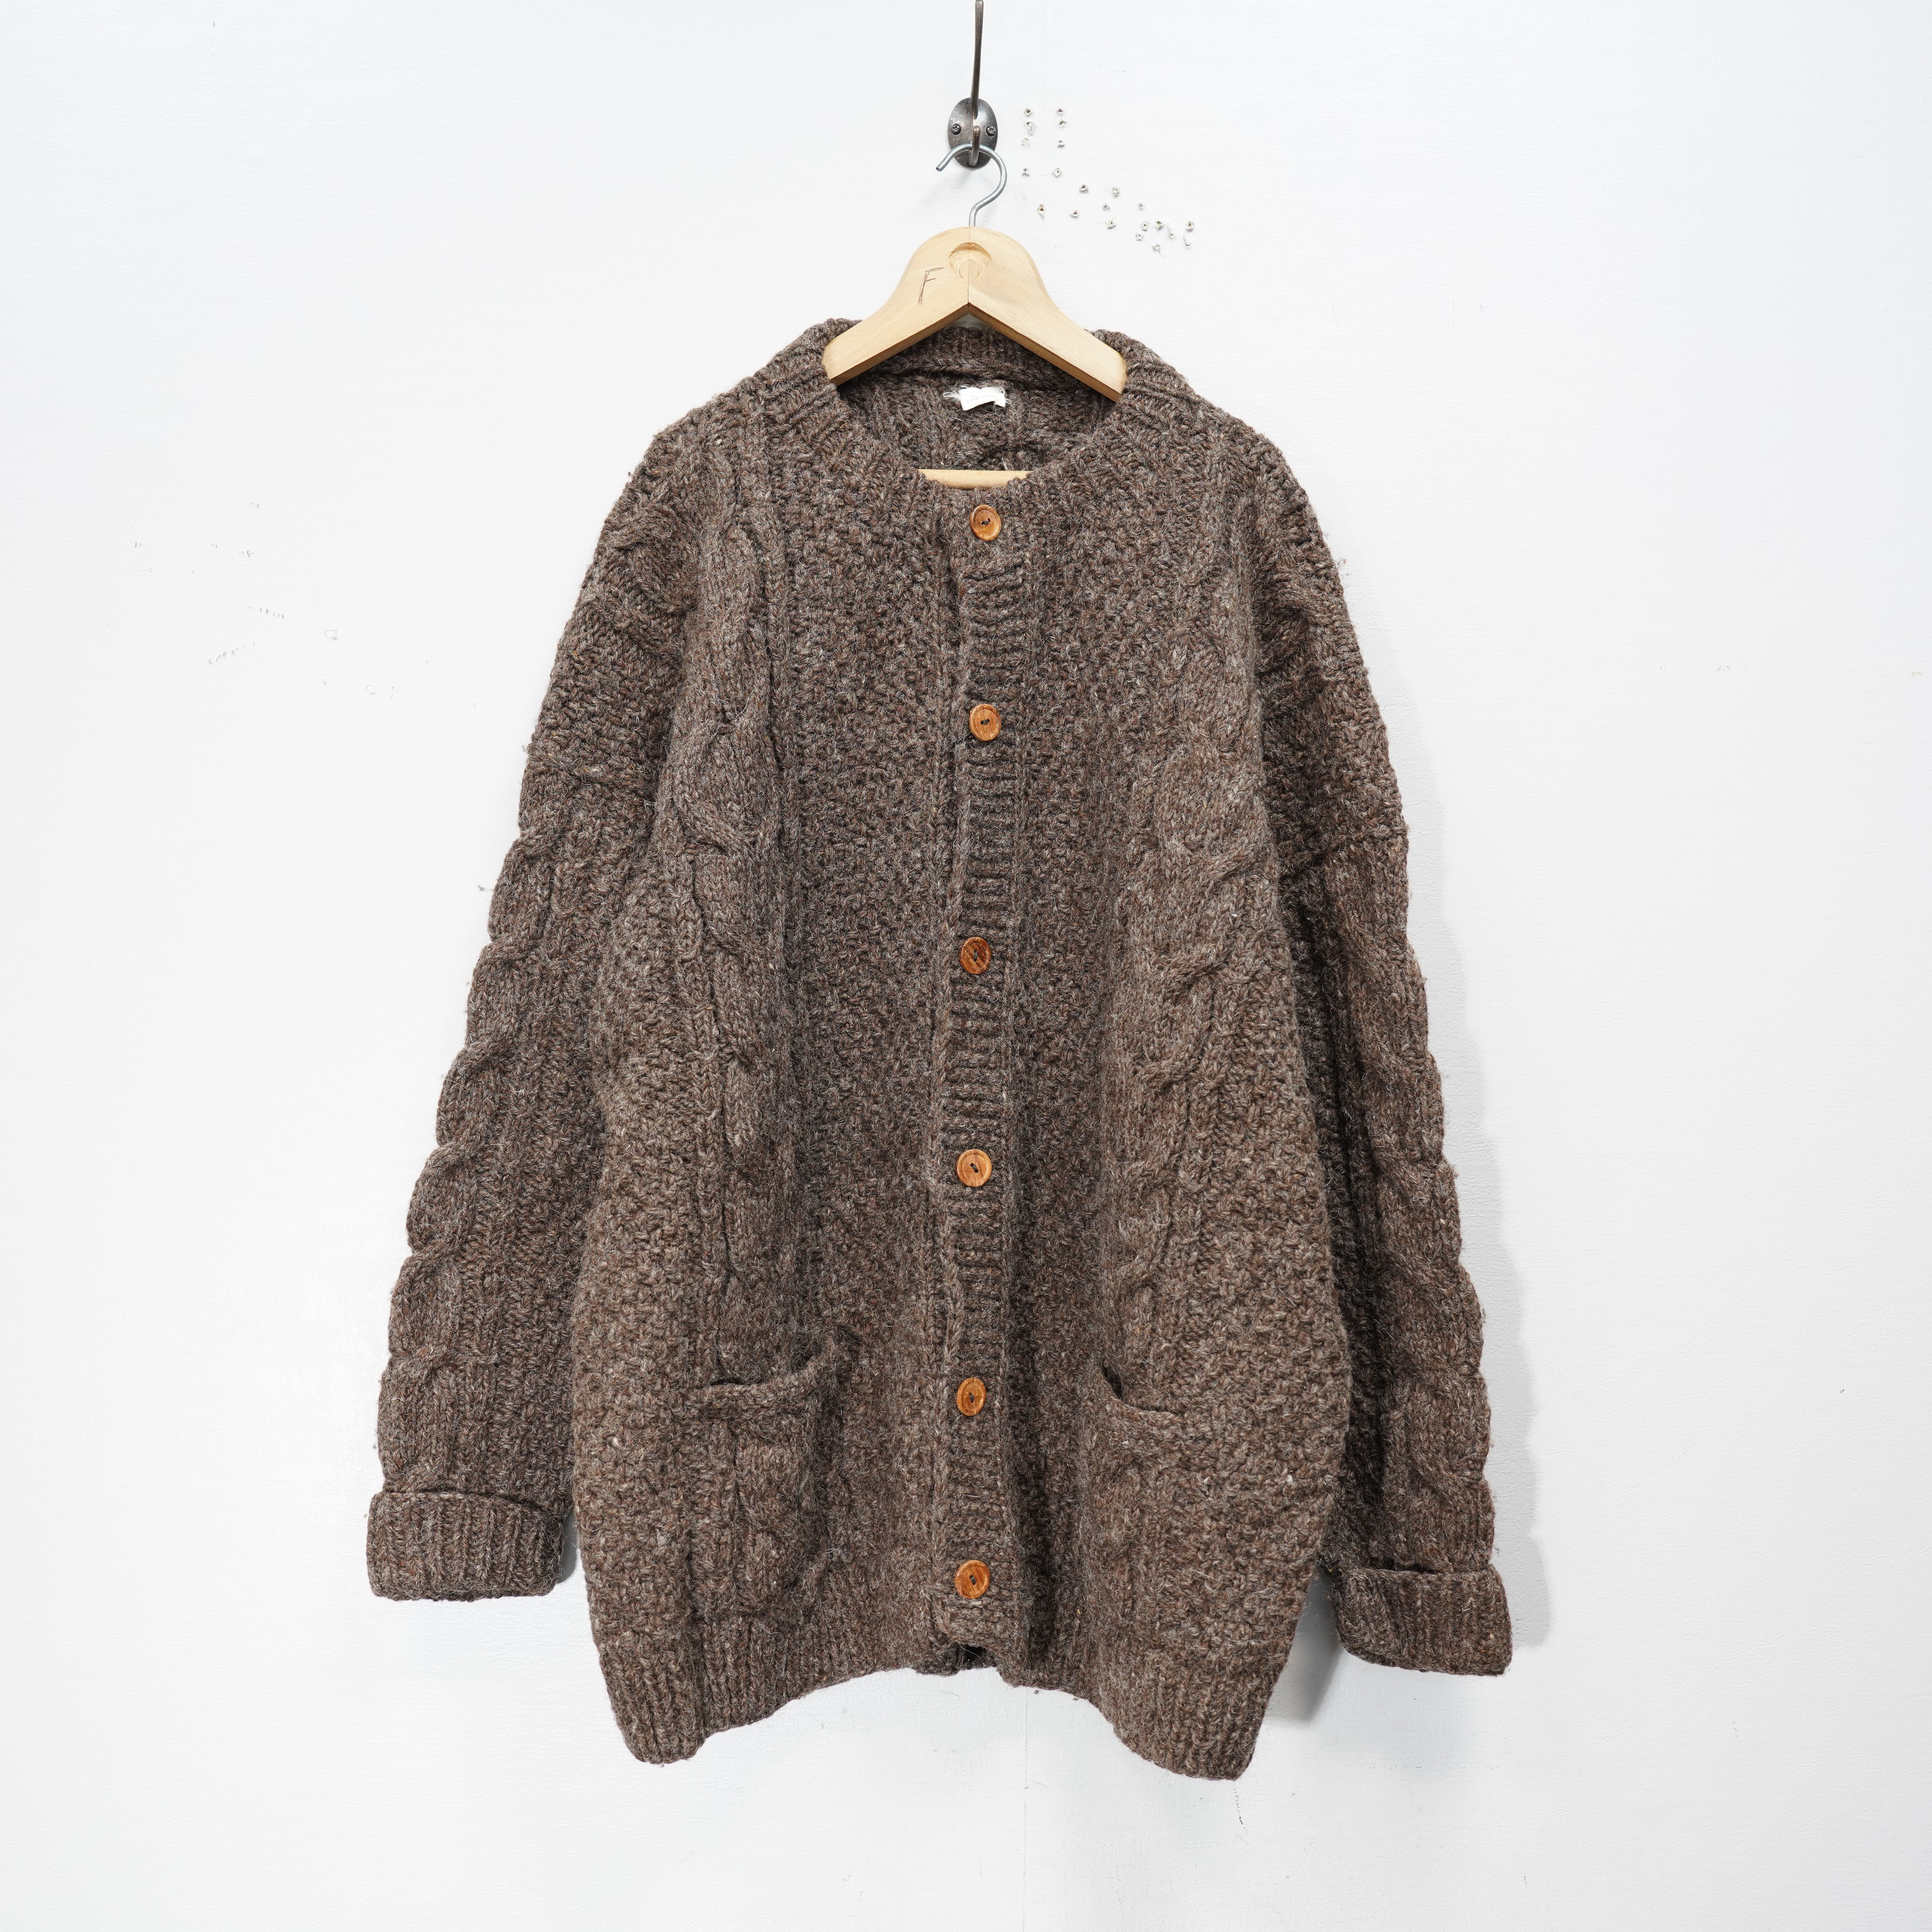 EU VINTAGE CABLE DESIGN KNIT CARDIGAN MADE IN NEPAL/ヨーロッパ古着